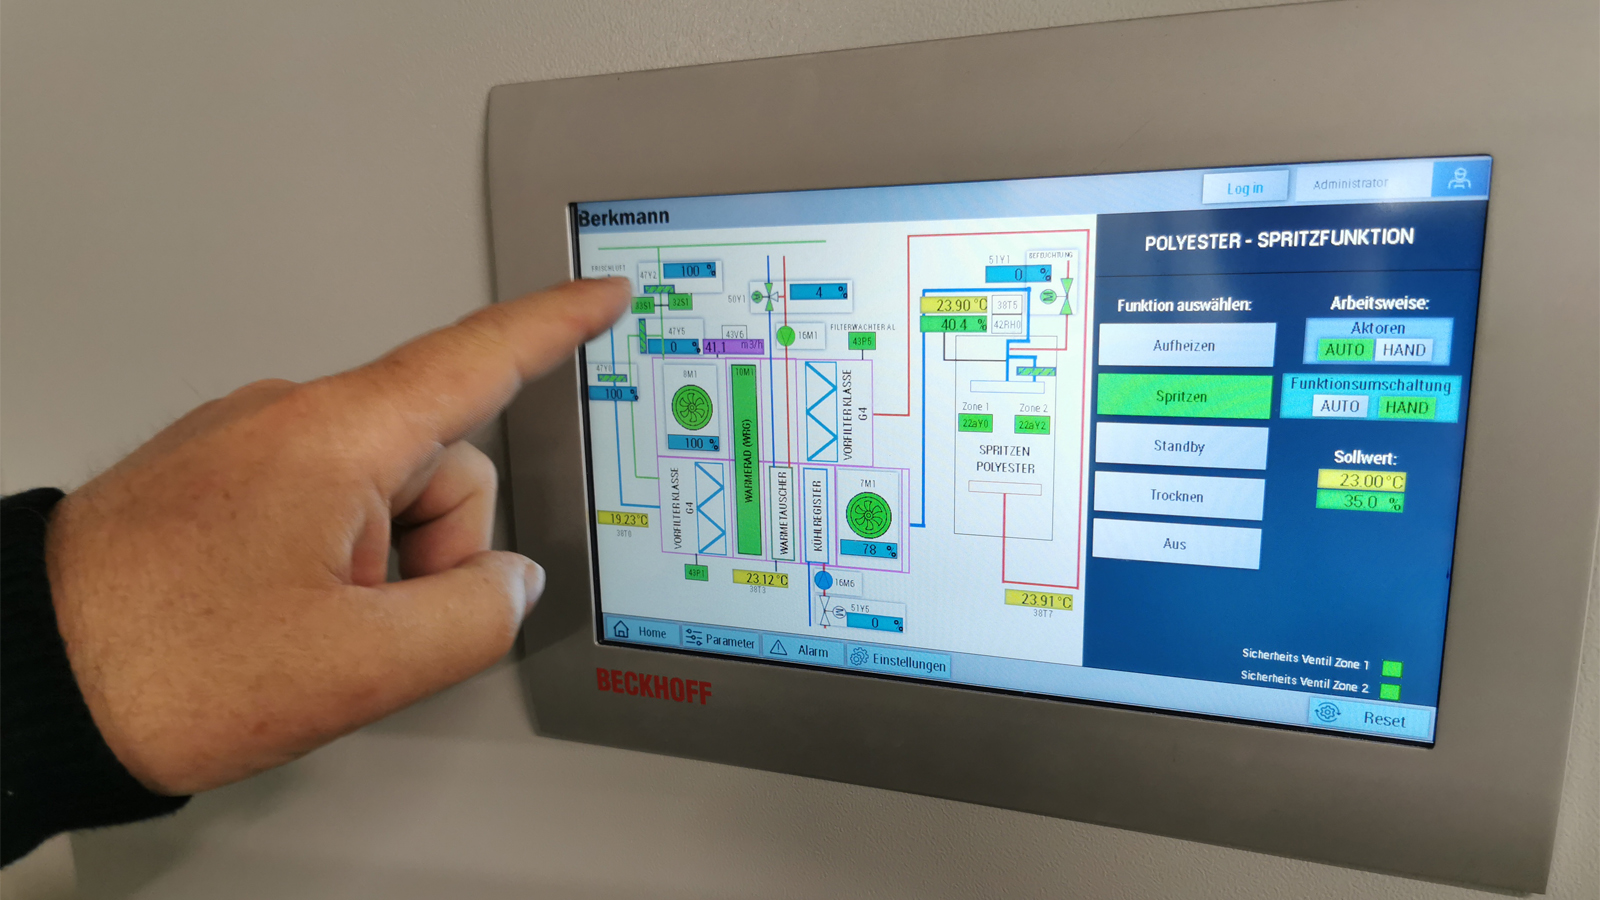 The Beckhoff CP690x built-in touch panel provides a clear, convenient location from which to visualize and operate the varnishing plant using the HTML5-based TwinCAT HMI. 